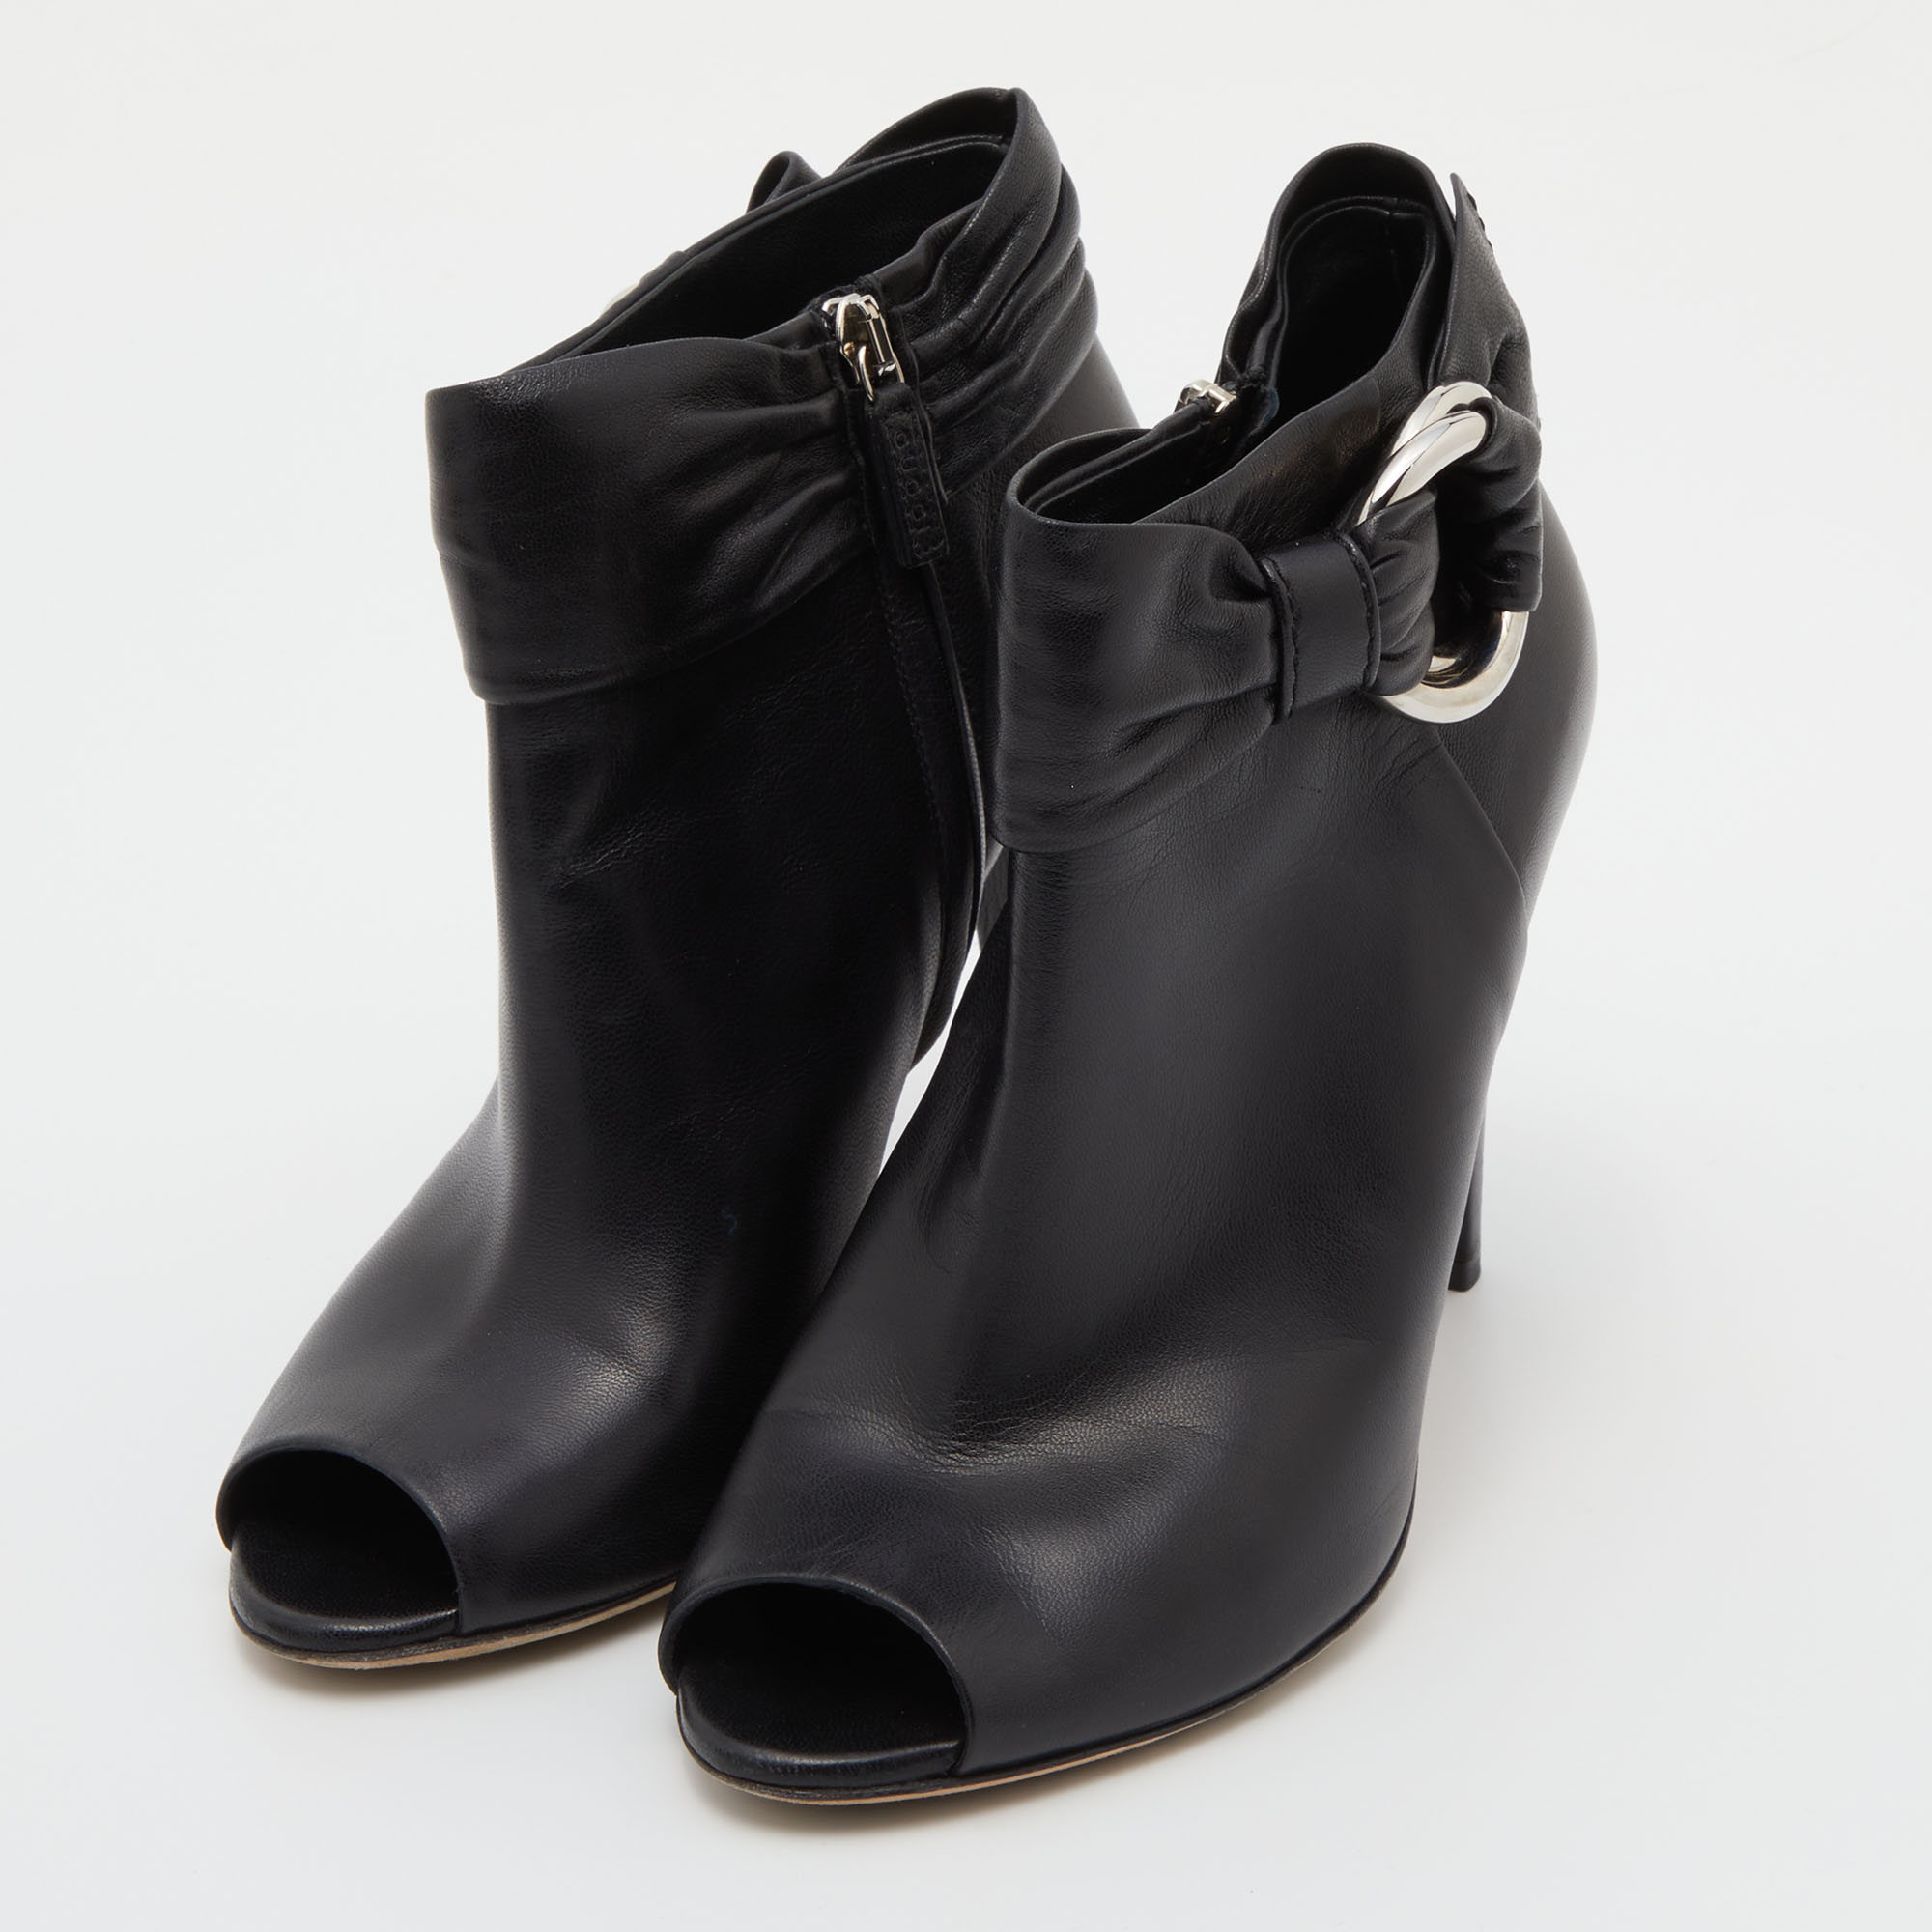 

Gucci Black Leather Peep Toe Ankle Booties Size